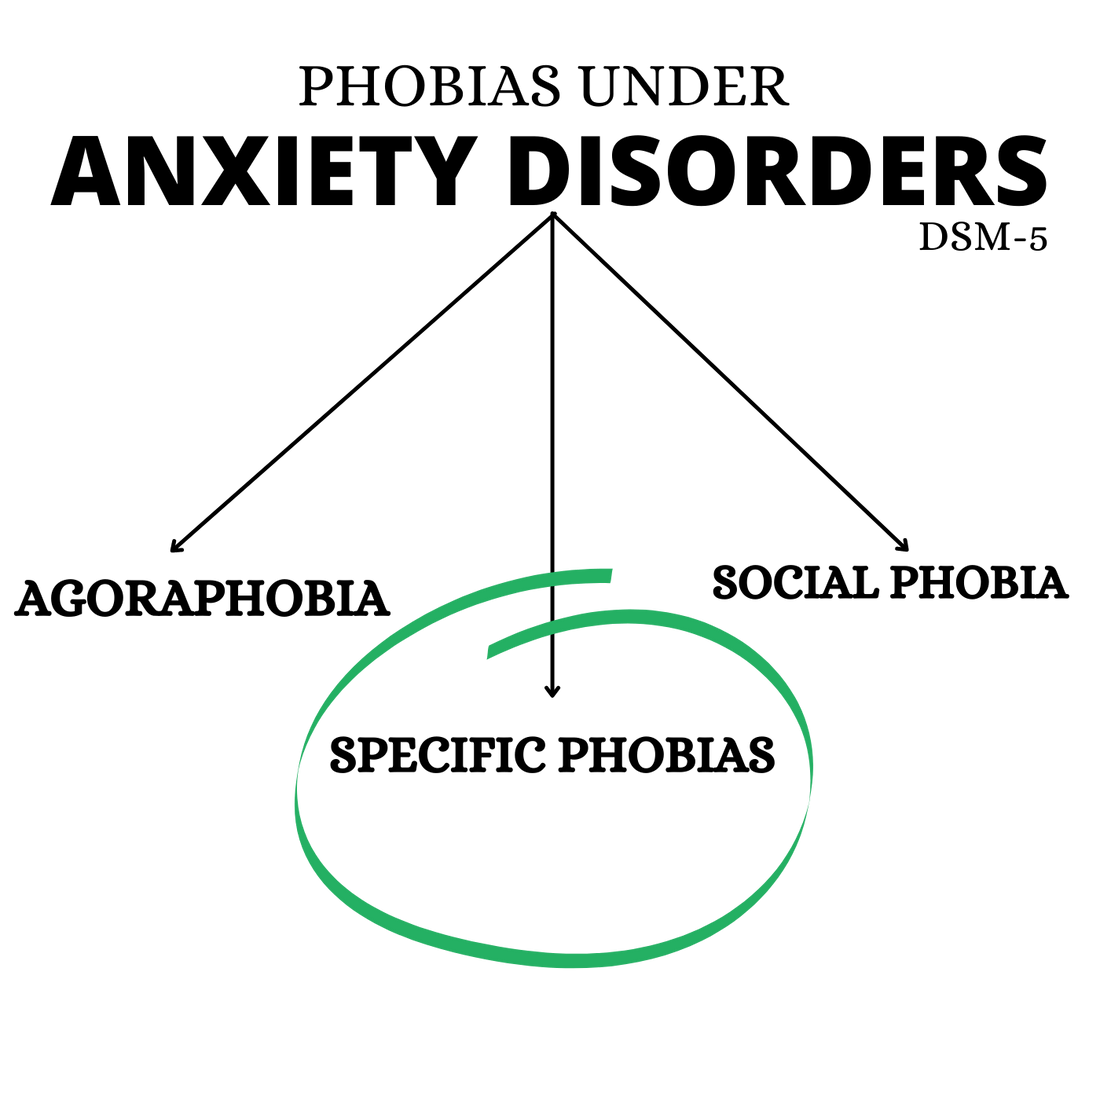 Specific phobia definitions, types, causes, diagnosis, treatments, self help, DSM-5. - Medical Arts Shop